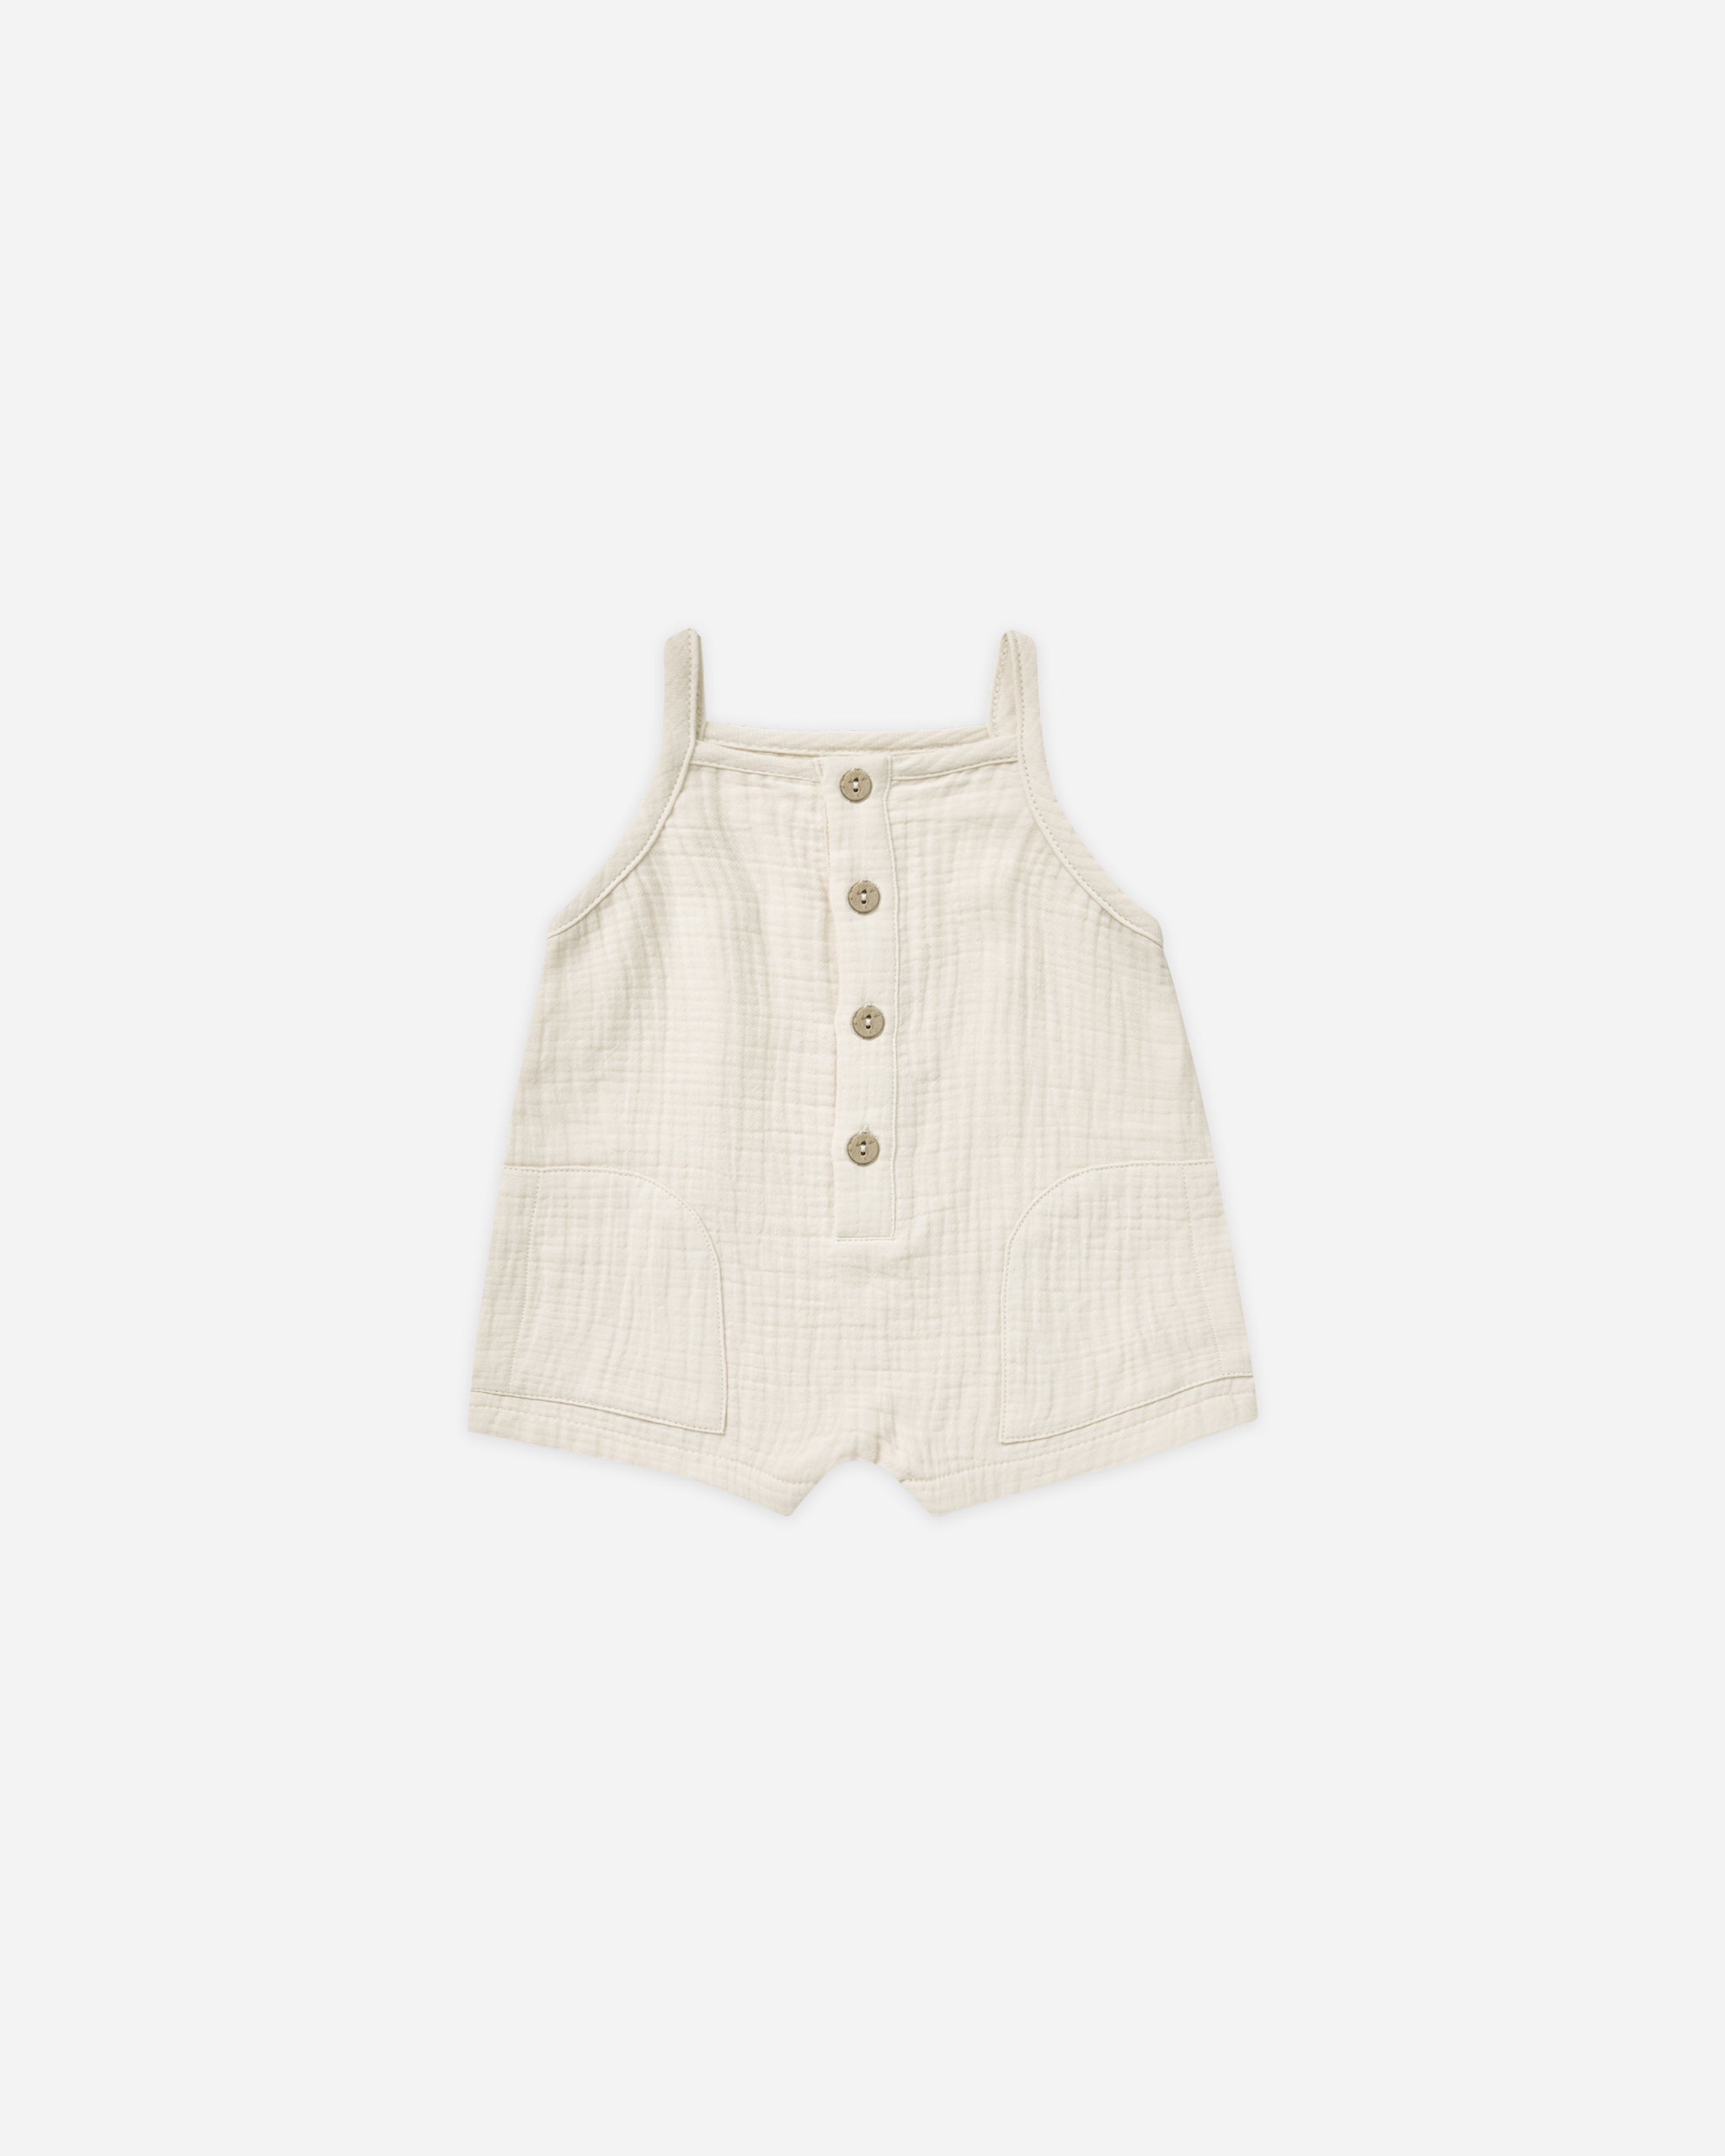 Oakley Romper || Natural - Rylee + Cru | Kids Clothes | Trendy Baby Clothes | Modern Infant Outfits |